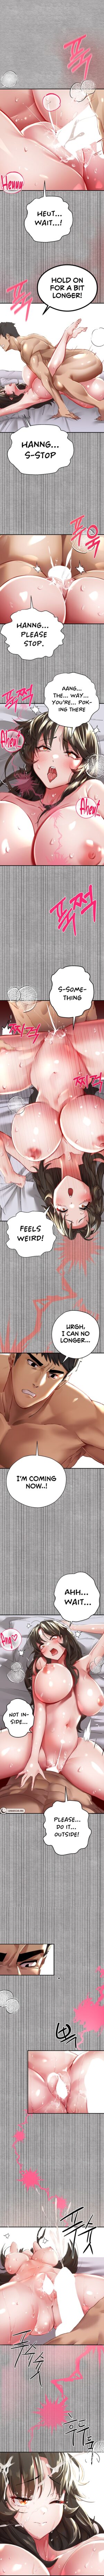 [Duke Hangul, Na Sunhyang] I Have To Sleep With A Stranger? (1-12) [English] [Lunar Scans] [Ongoing]